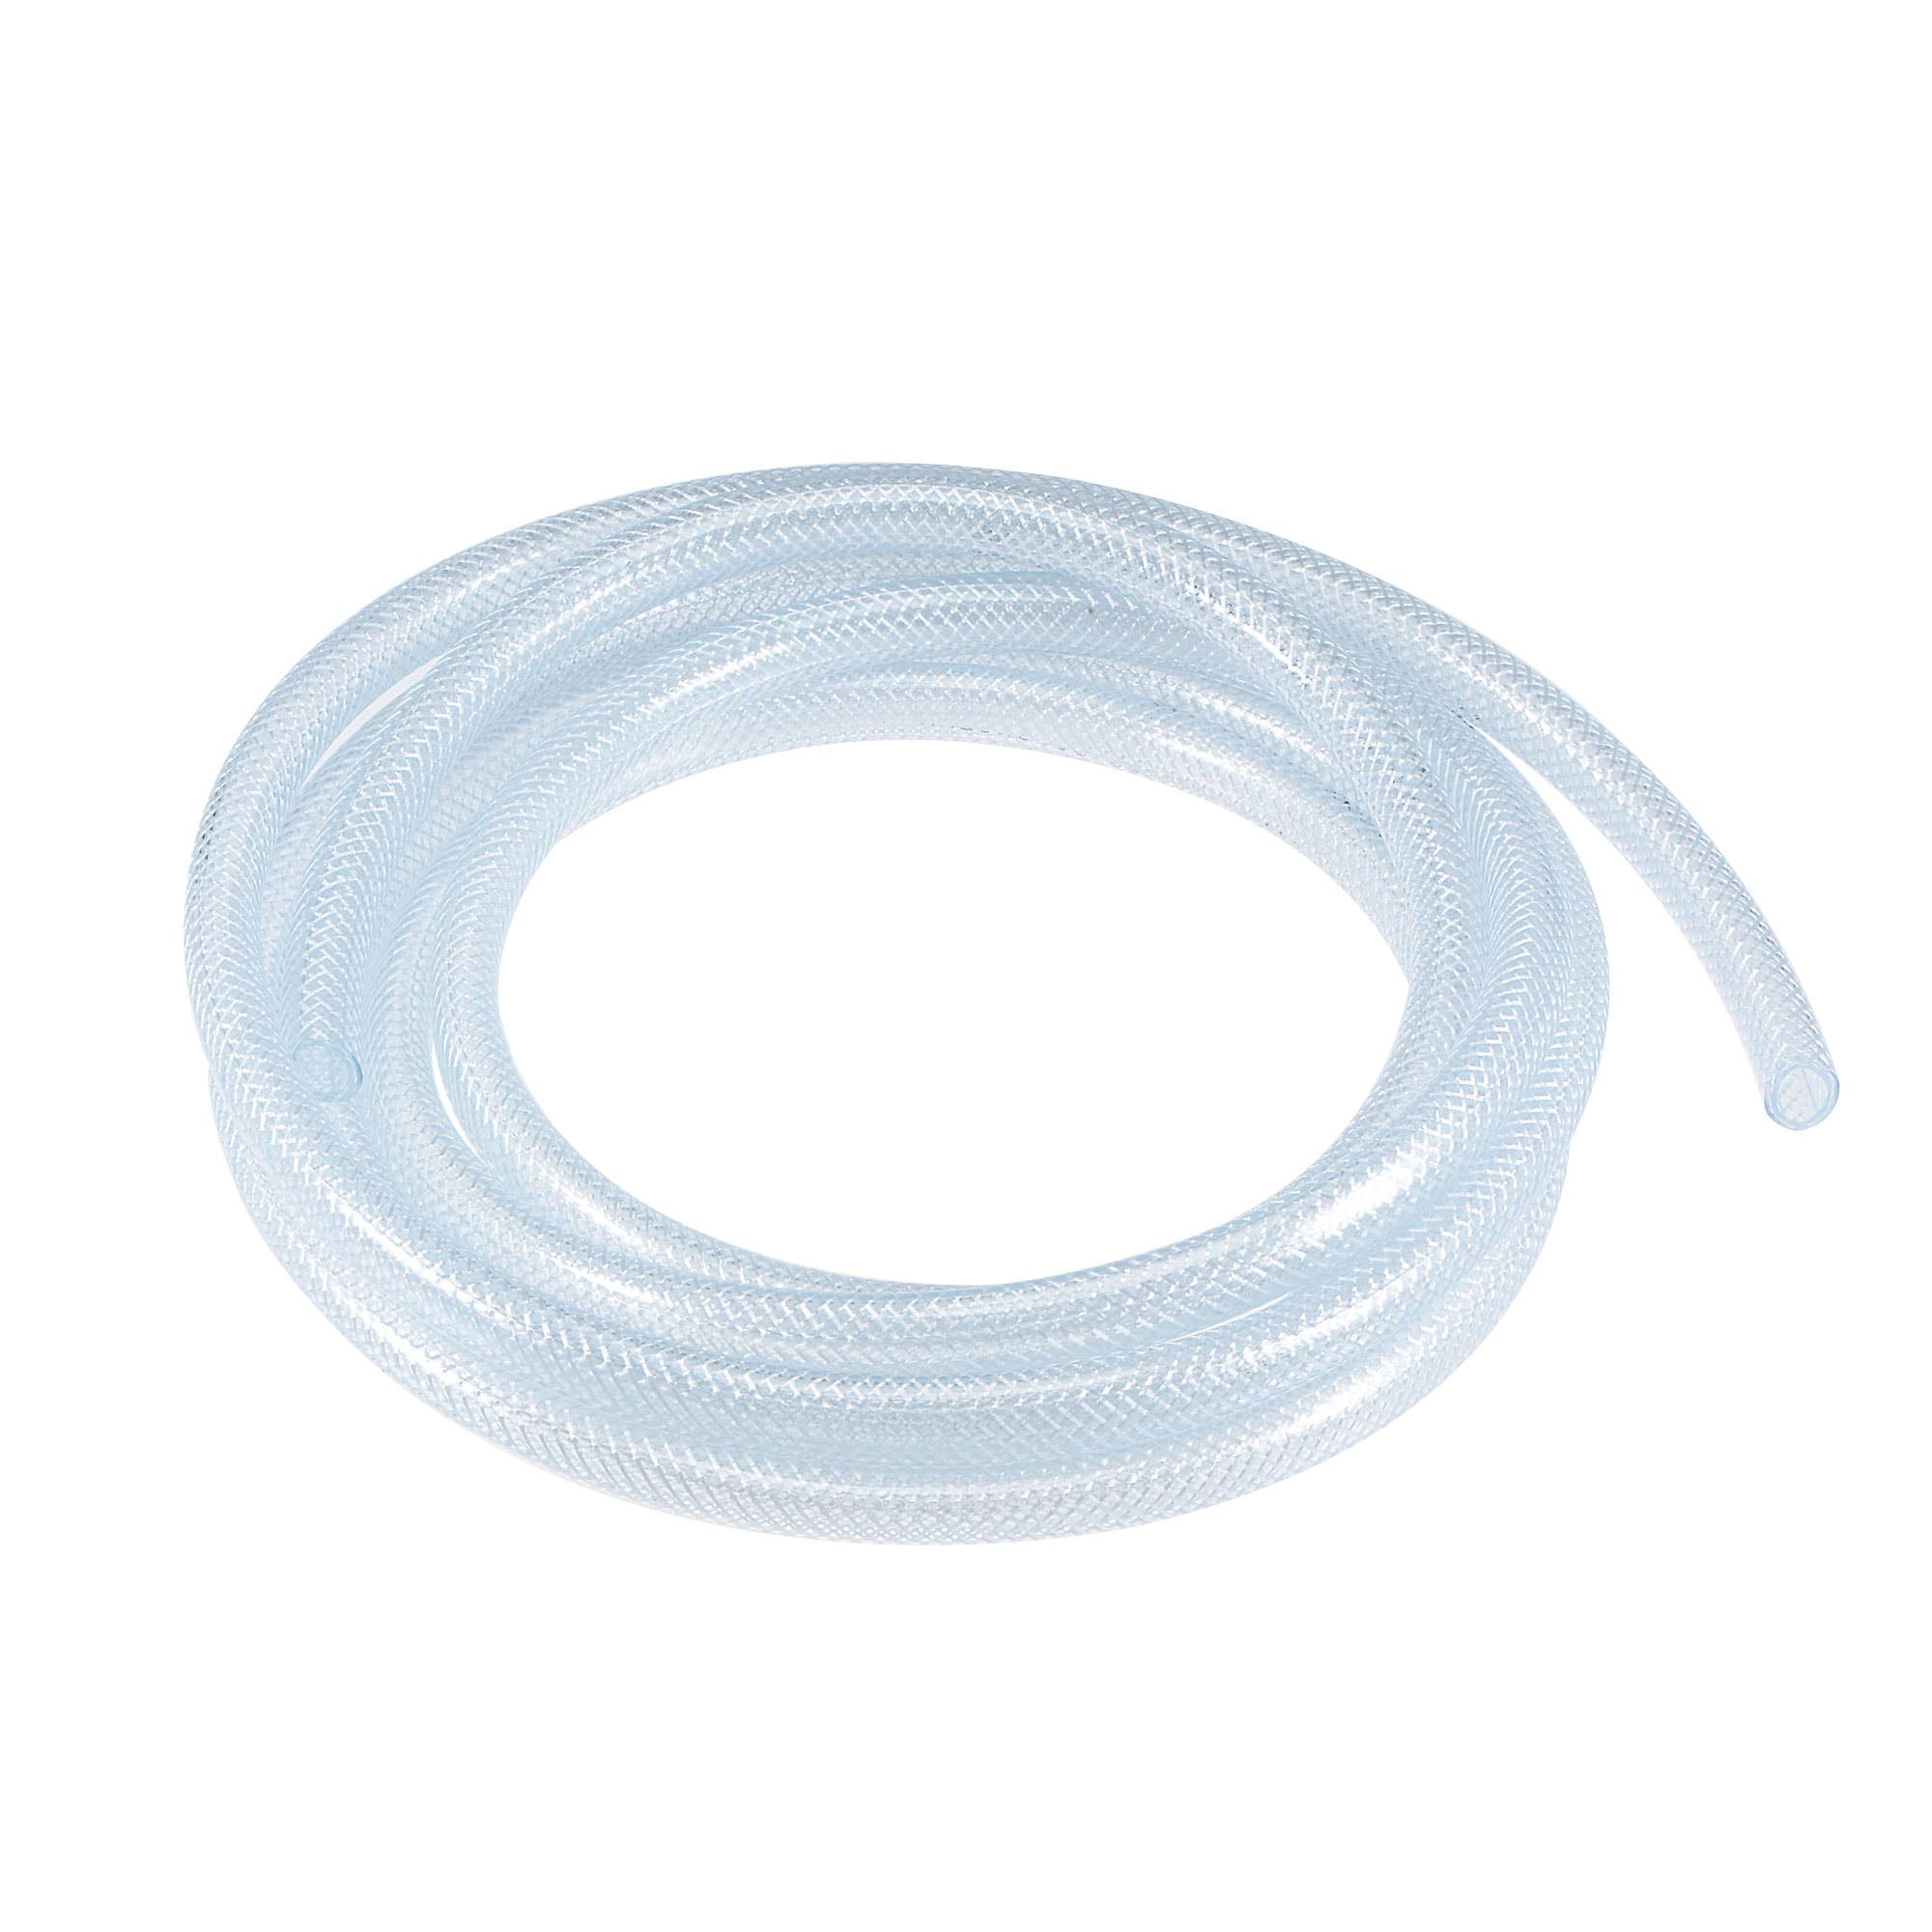 7mm PVC CLEAR TRANSPARENT TUBE FLEXIBLE HOSE PIPE AIR WATER W6C8 